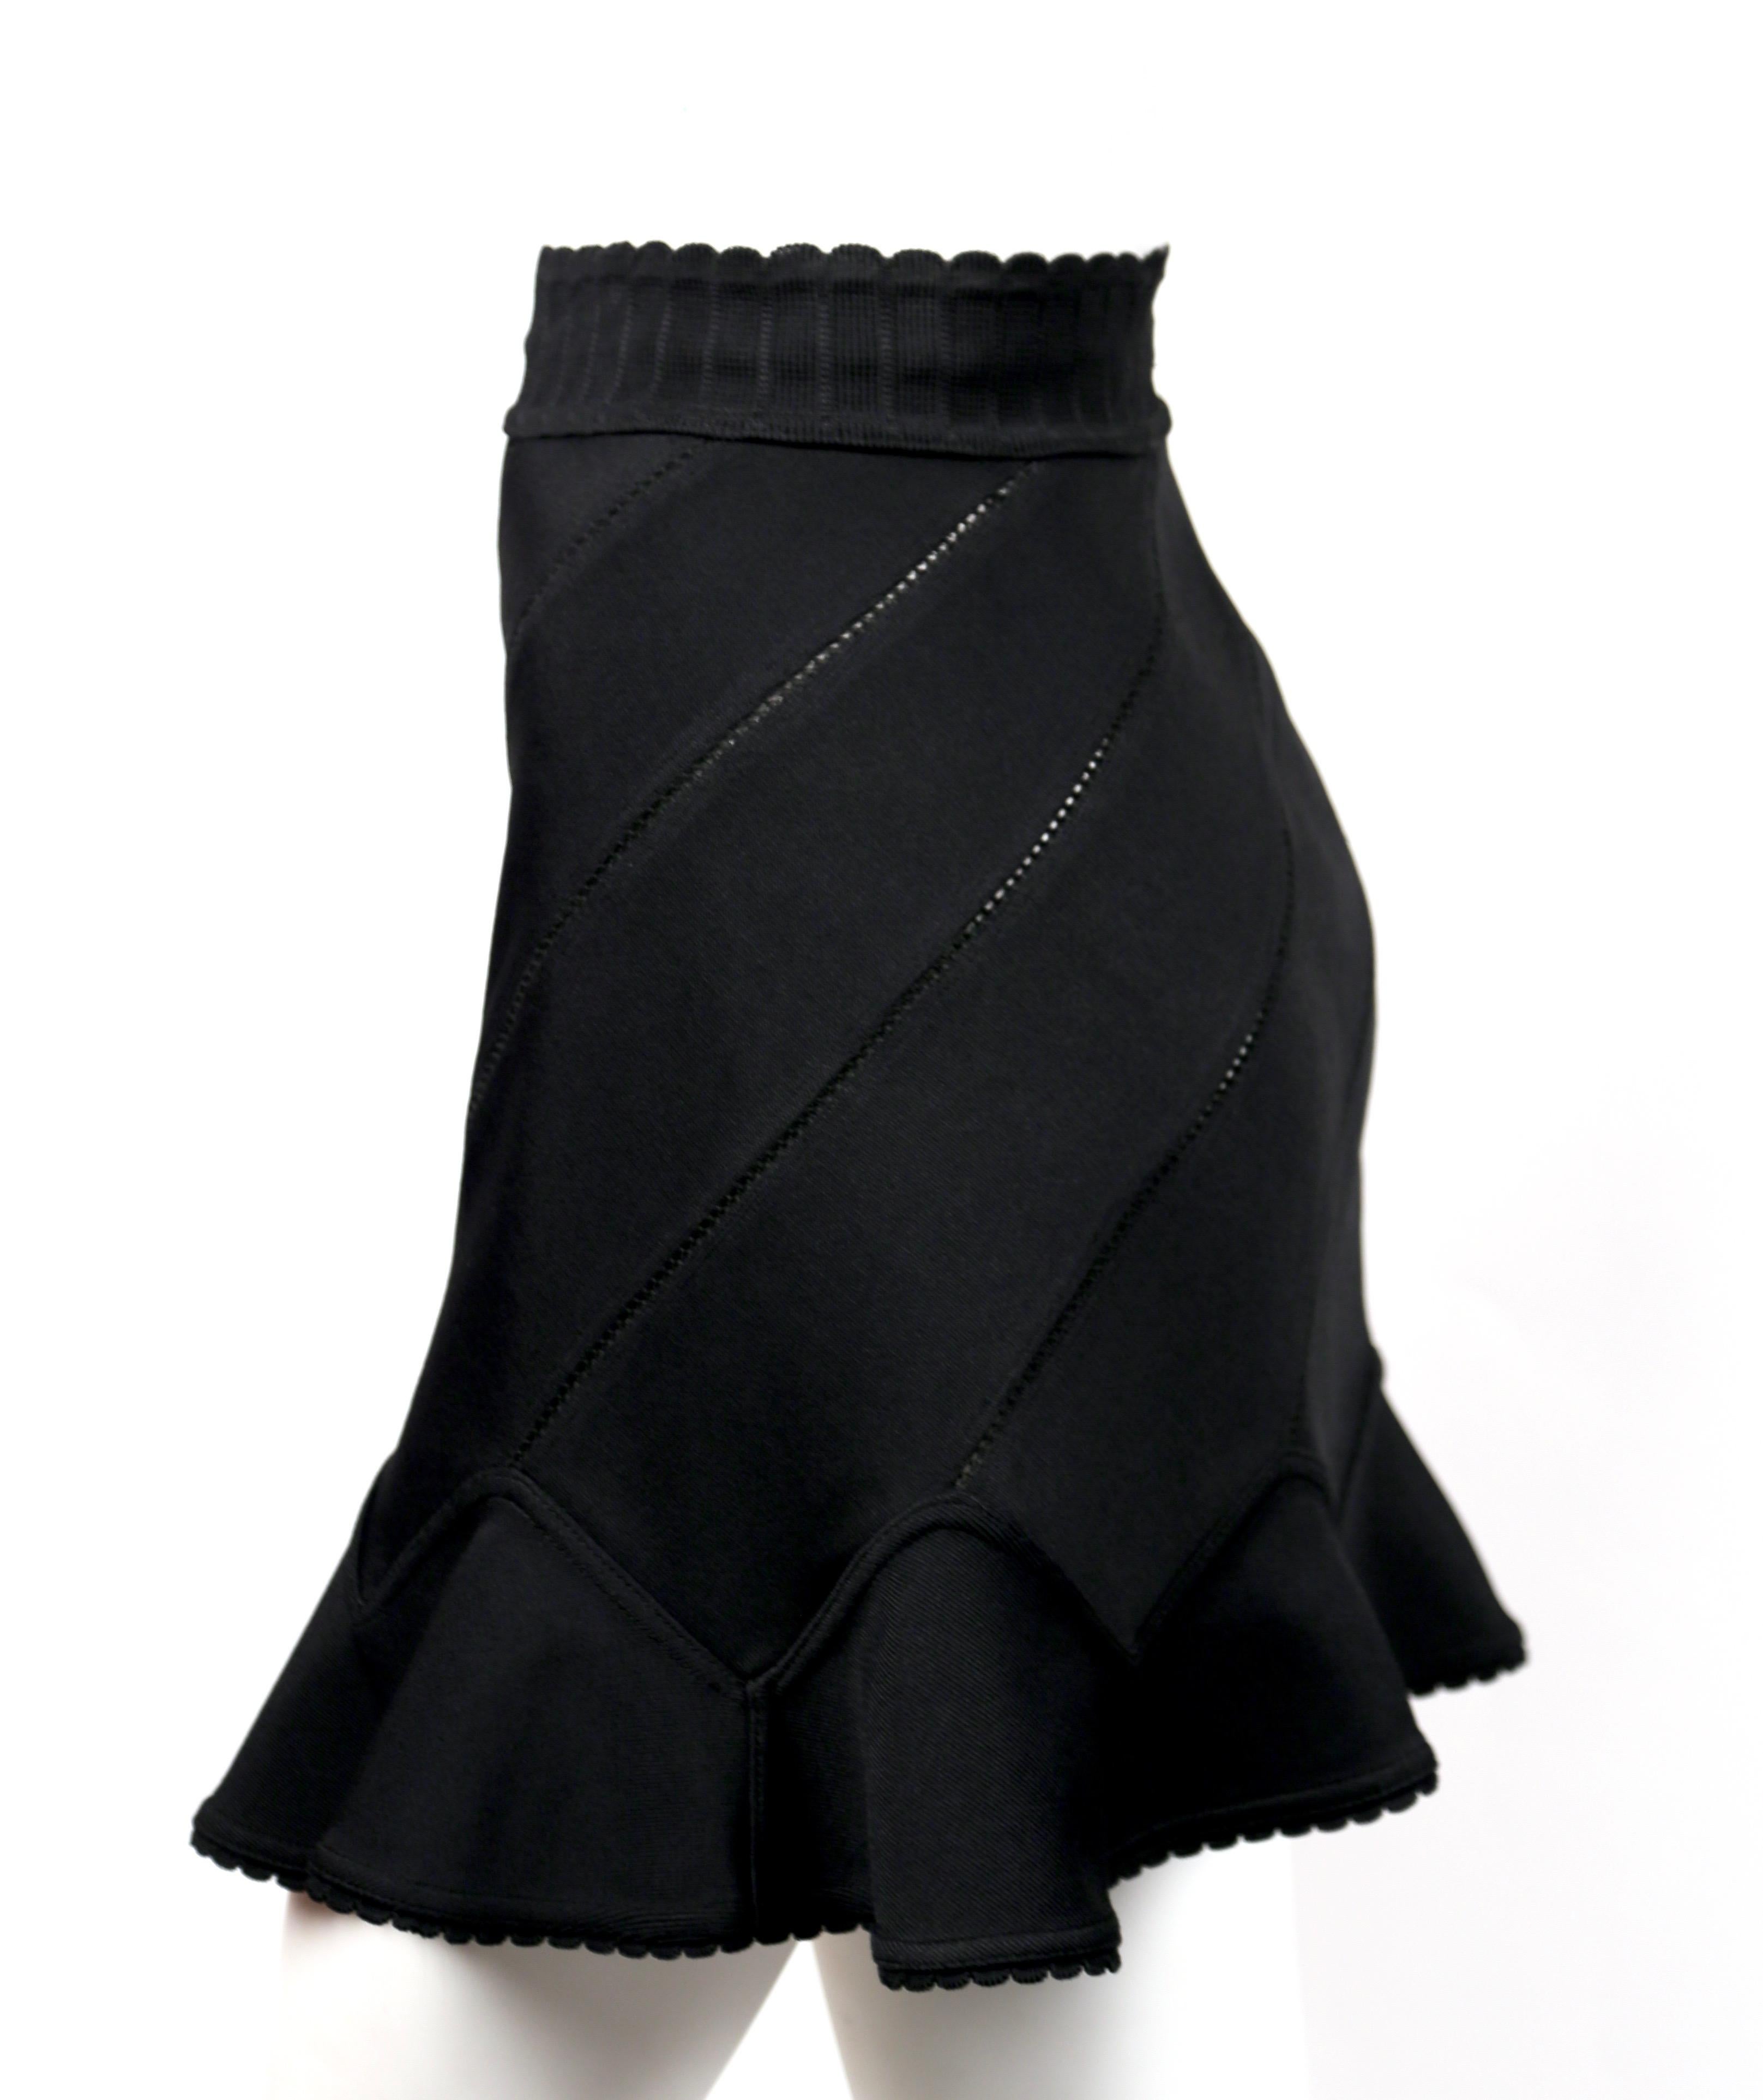 Jet-black, pointelle-knit skirt with spiral seams and flounced hem designed by Azzedine Alaia dating to spring of 1992.  Best fits a size XS or S. Approximate measurements (unstretched): waist 23